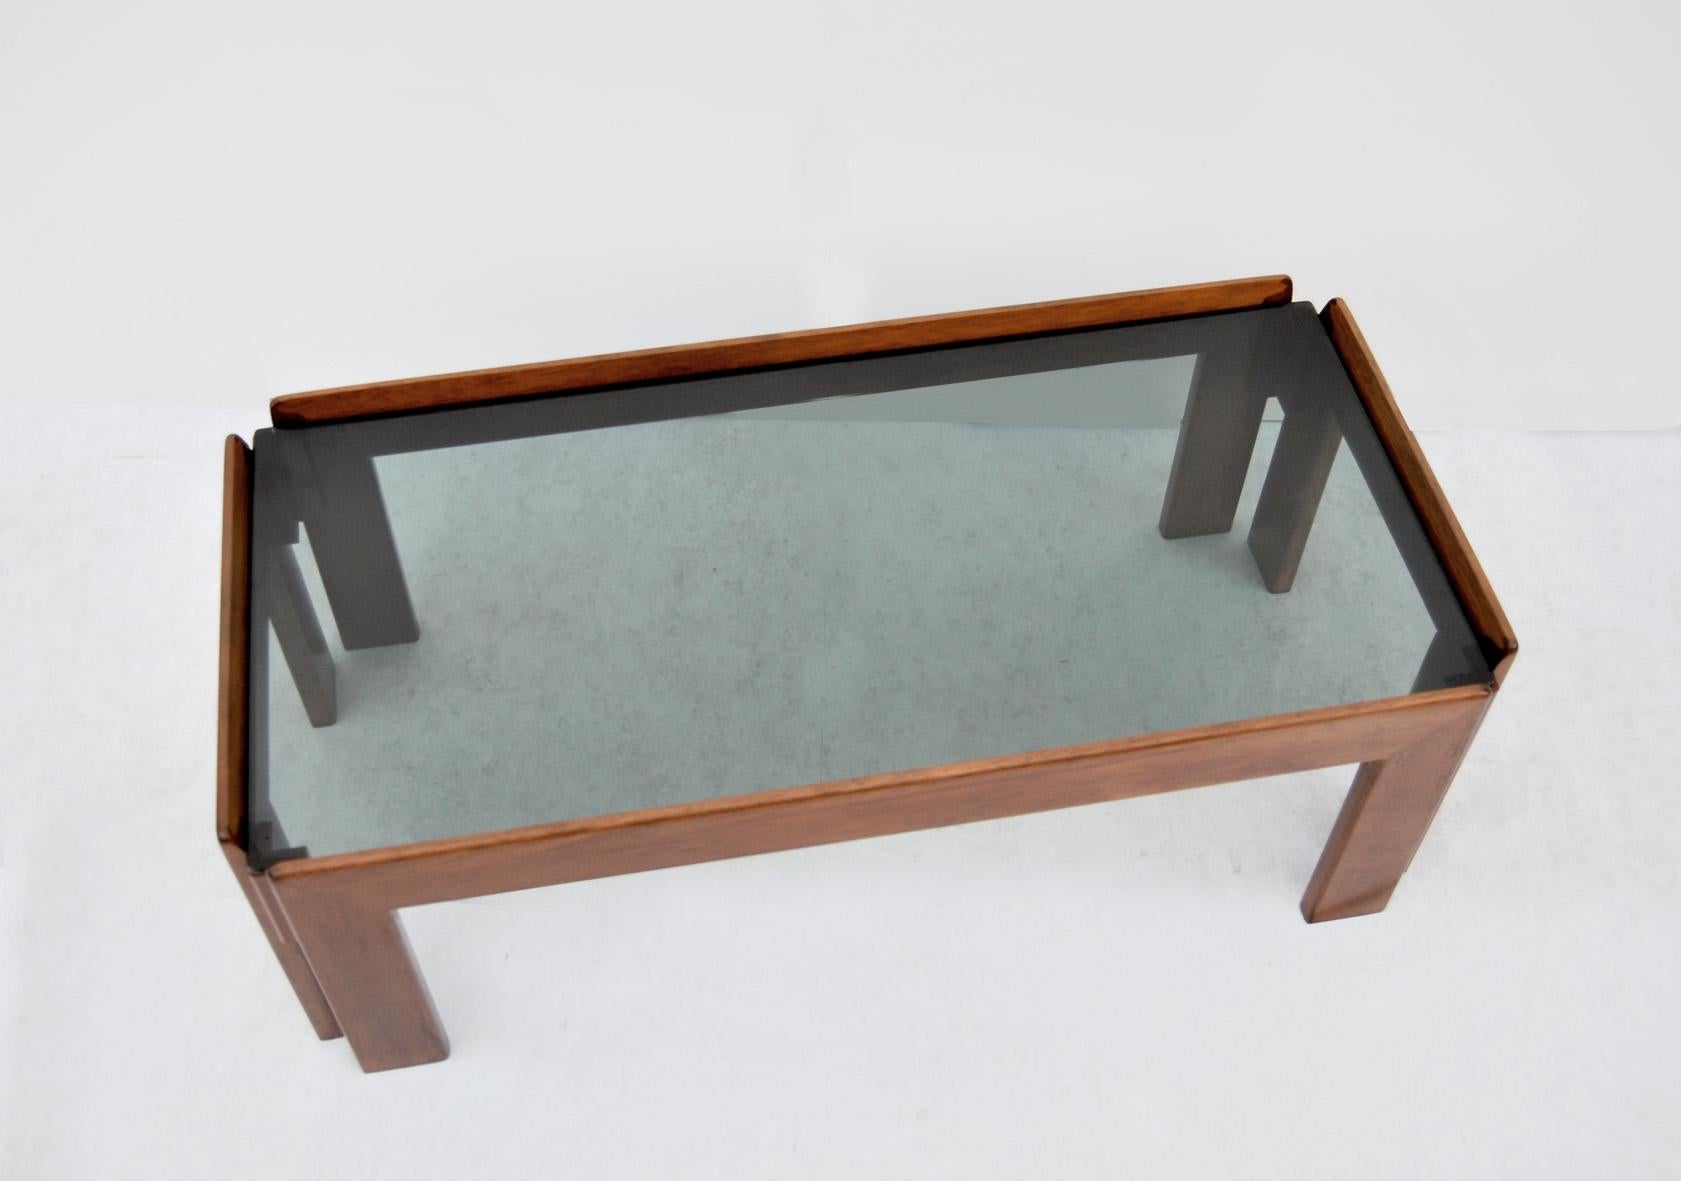 Coffee table by Afra & Tobia Scarpa for Cassina, Italy, 1960s. 
Rectangular coffee table in solid wood and smoked glass top by Afra & Tobia Scarpa for Cassina. It was made in Italy in the 1960s. This piece is attributed to the Designer/Producer. No